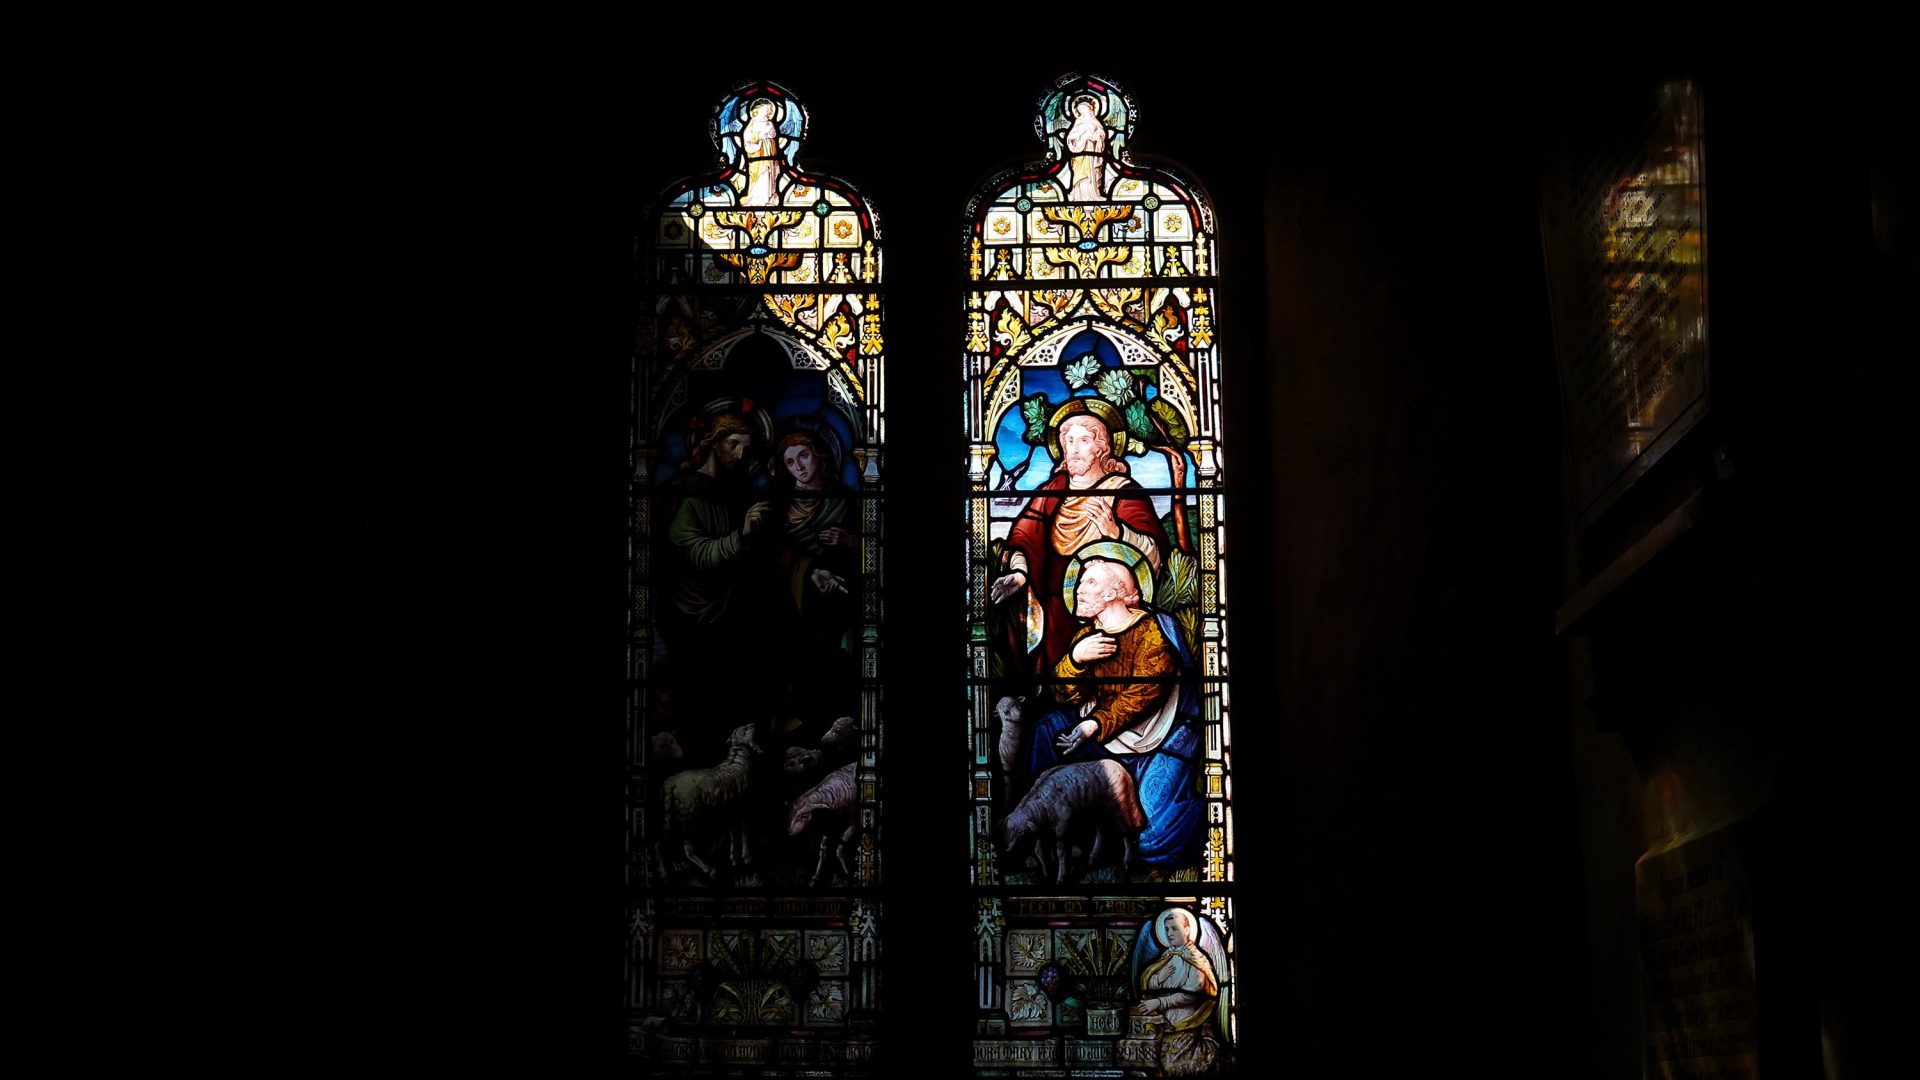 Light falls onto the stained glass windows of a church.